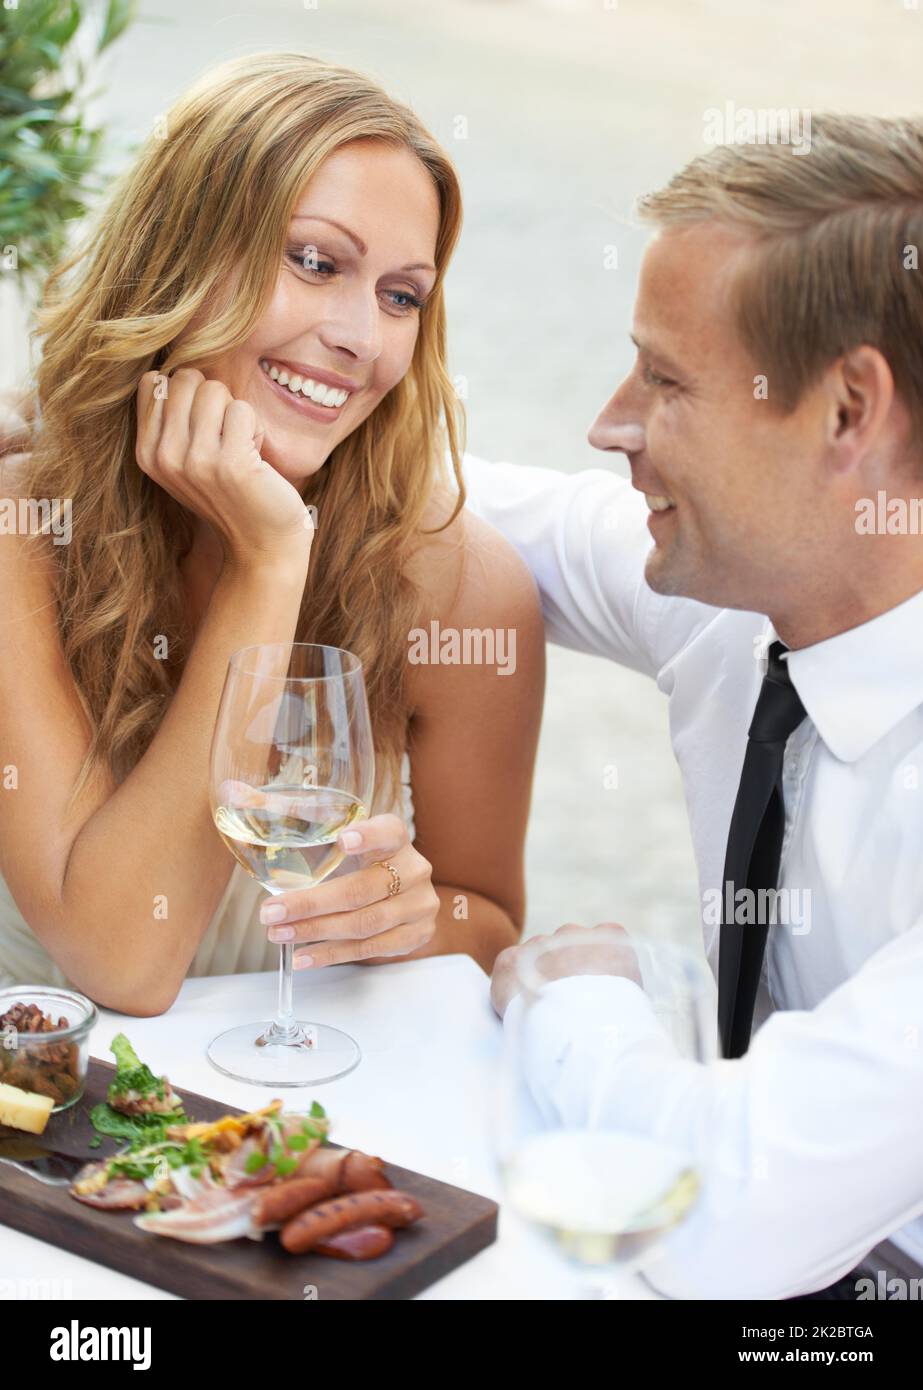 Hes everything I want. A woman enjoying her boyfriends company in a restaurant. Stock Photo